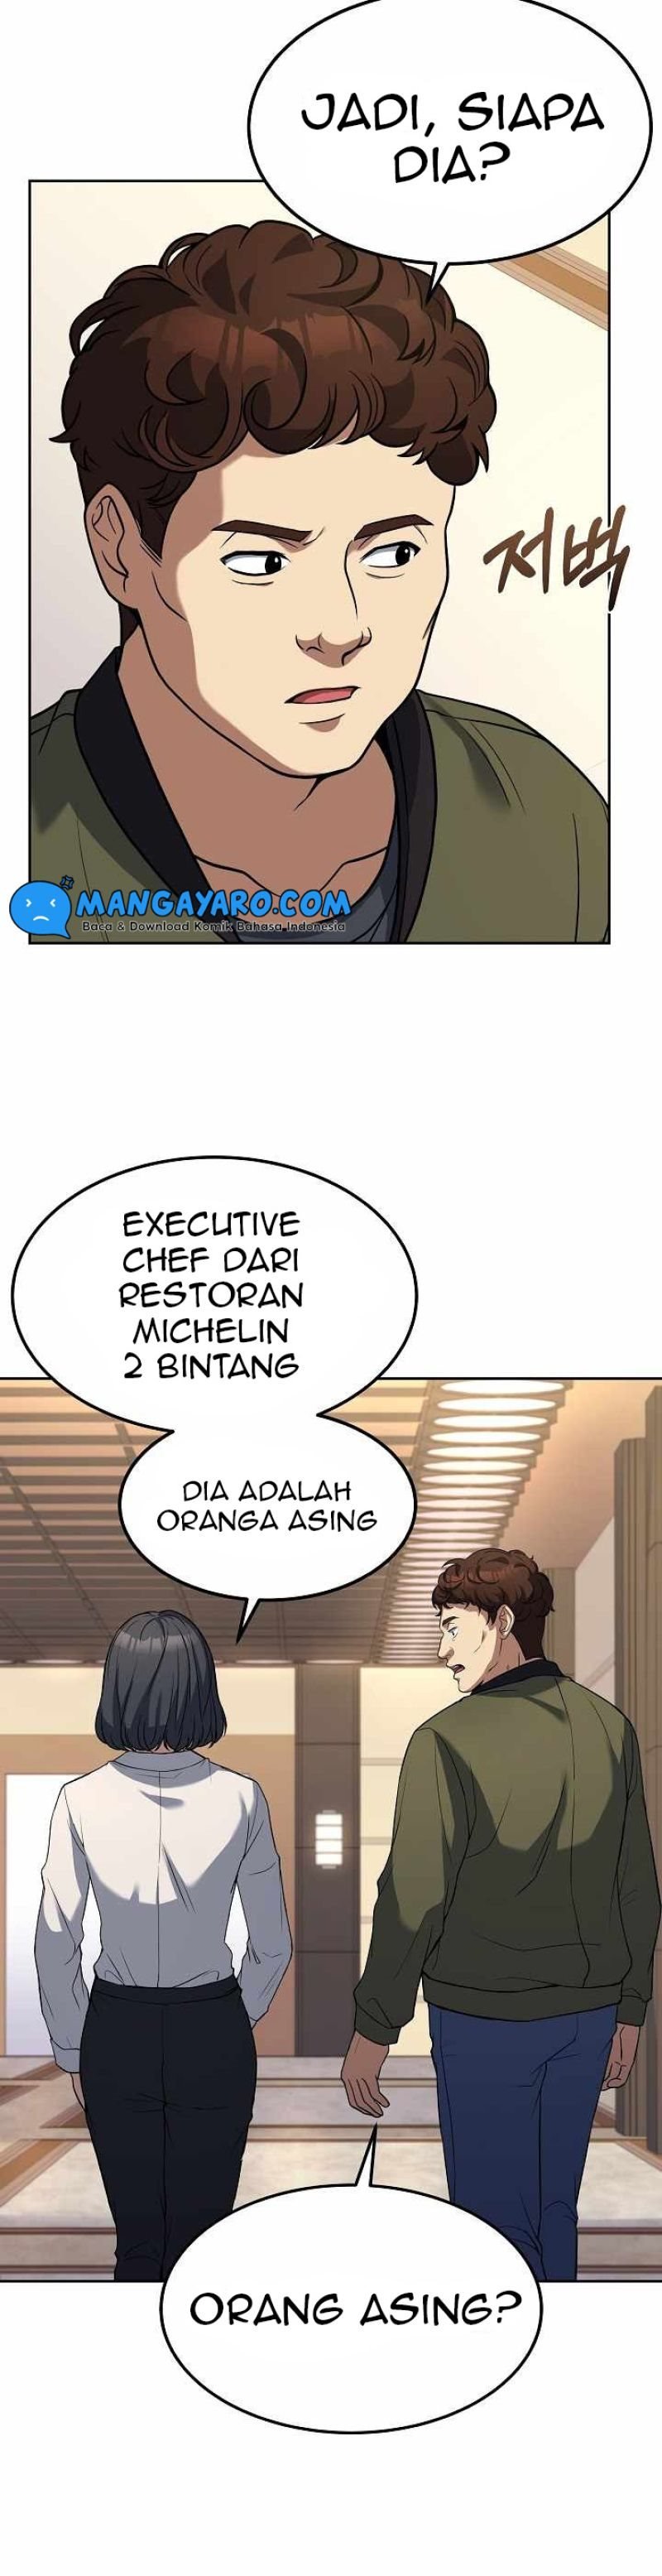 Youngest Chef From the 3rd Rate Hotel Chapter 42